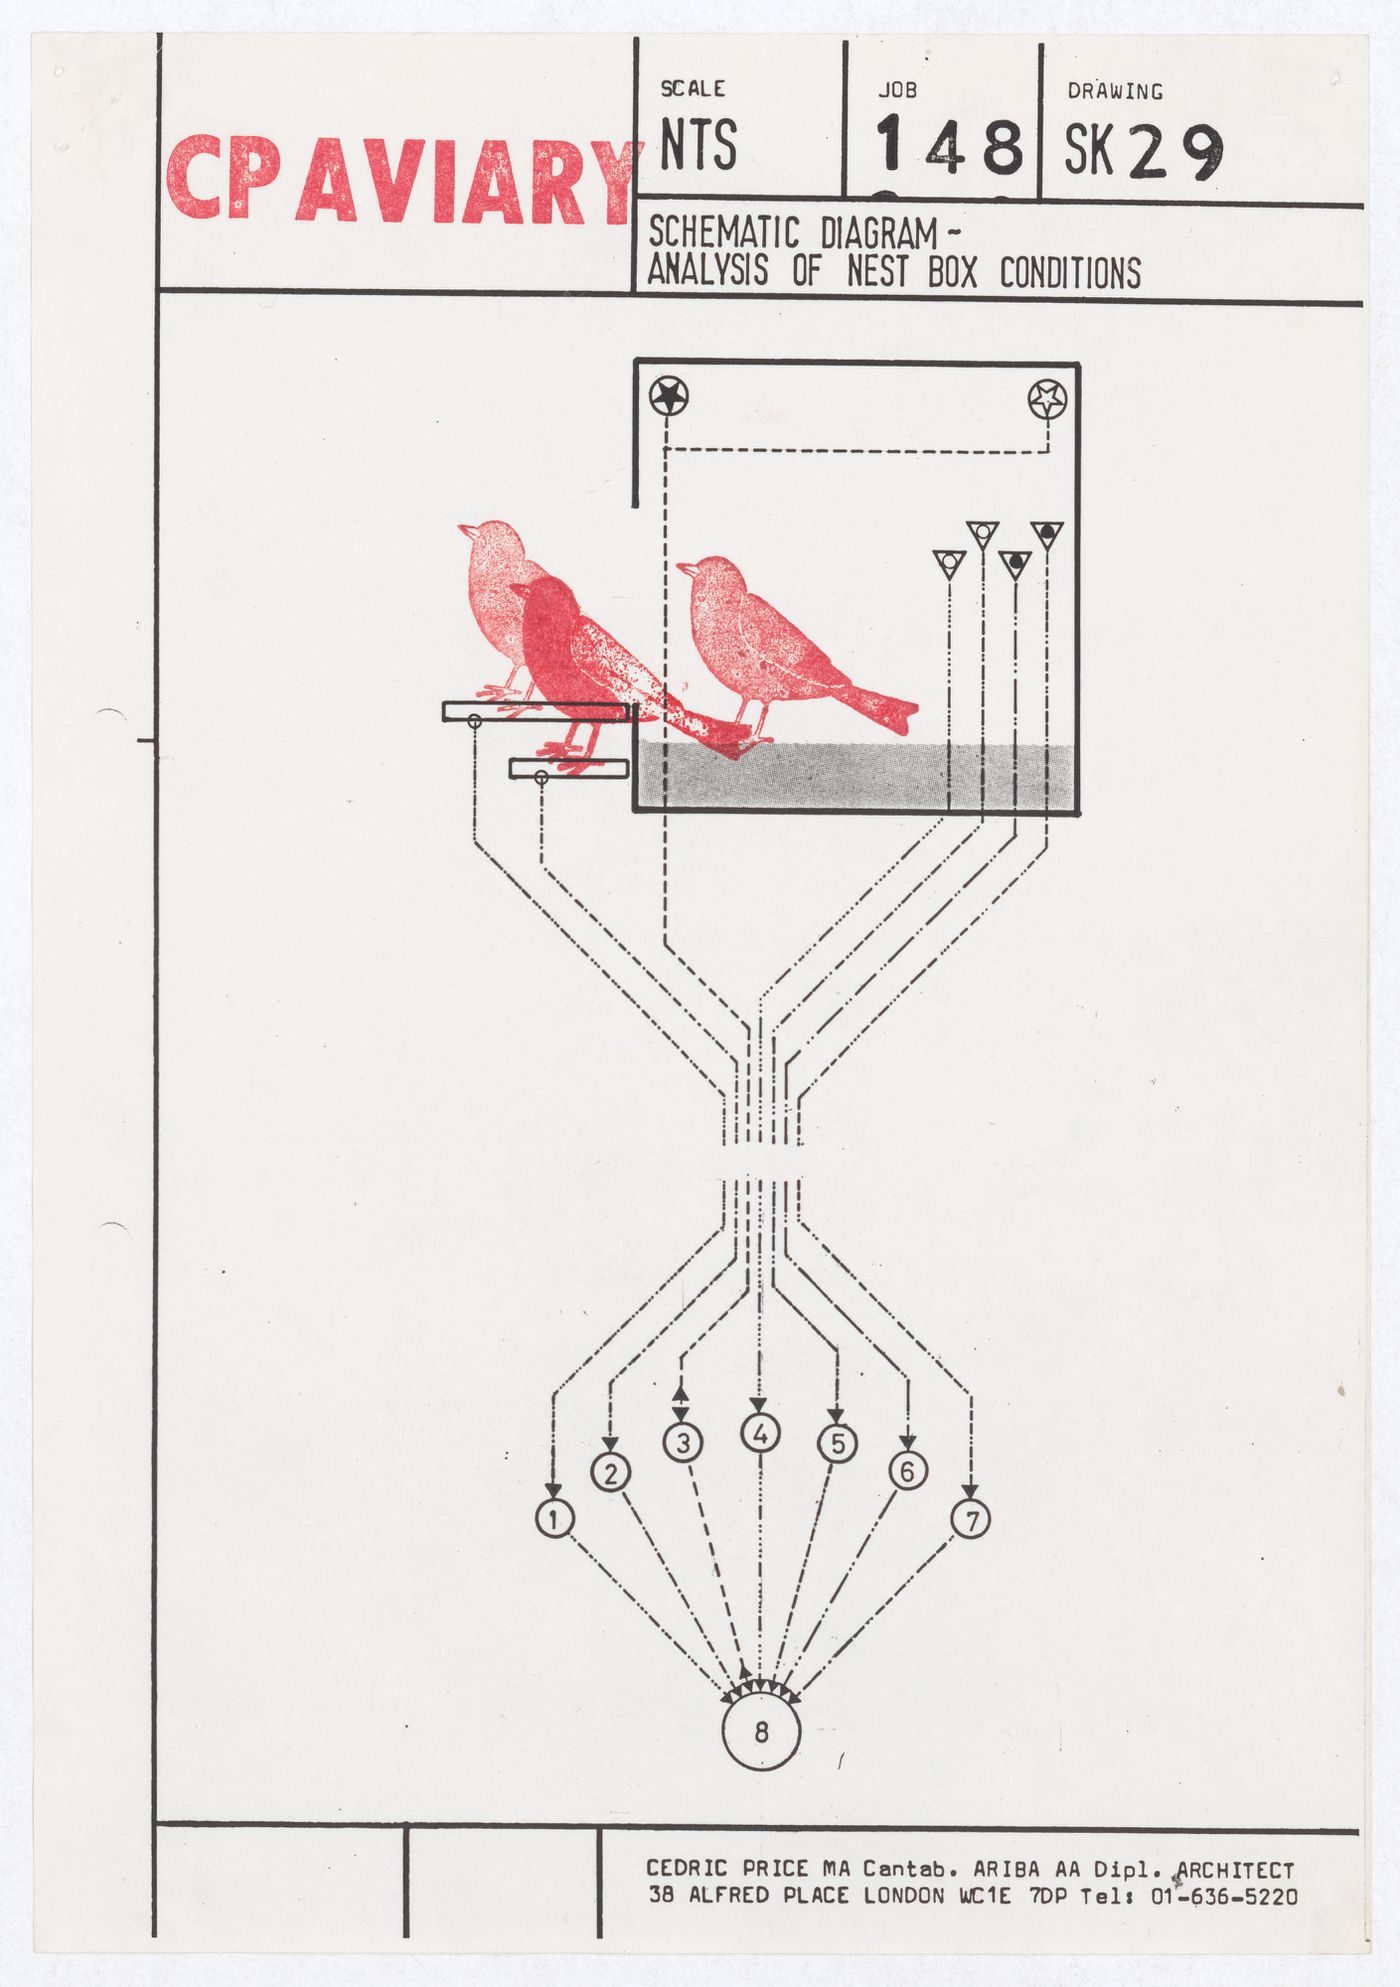 Schematic diagram analysis of nest box conditions for Cedric Price Aviary project